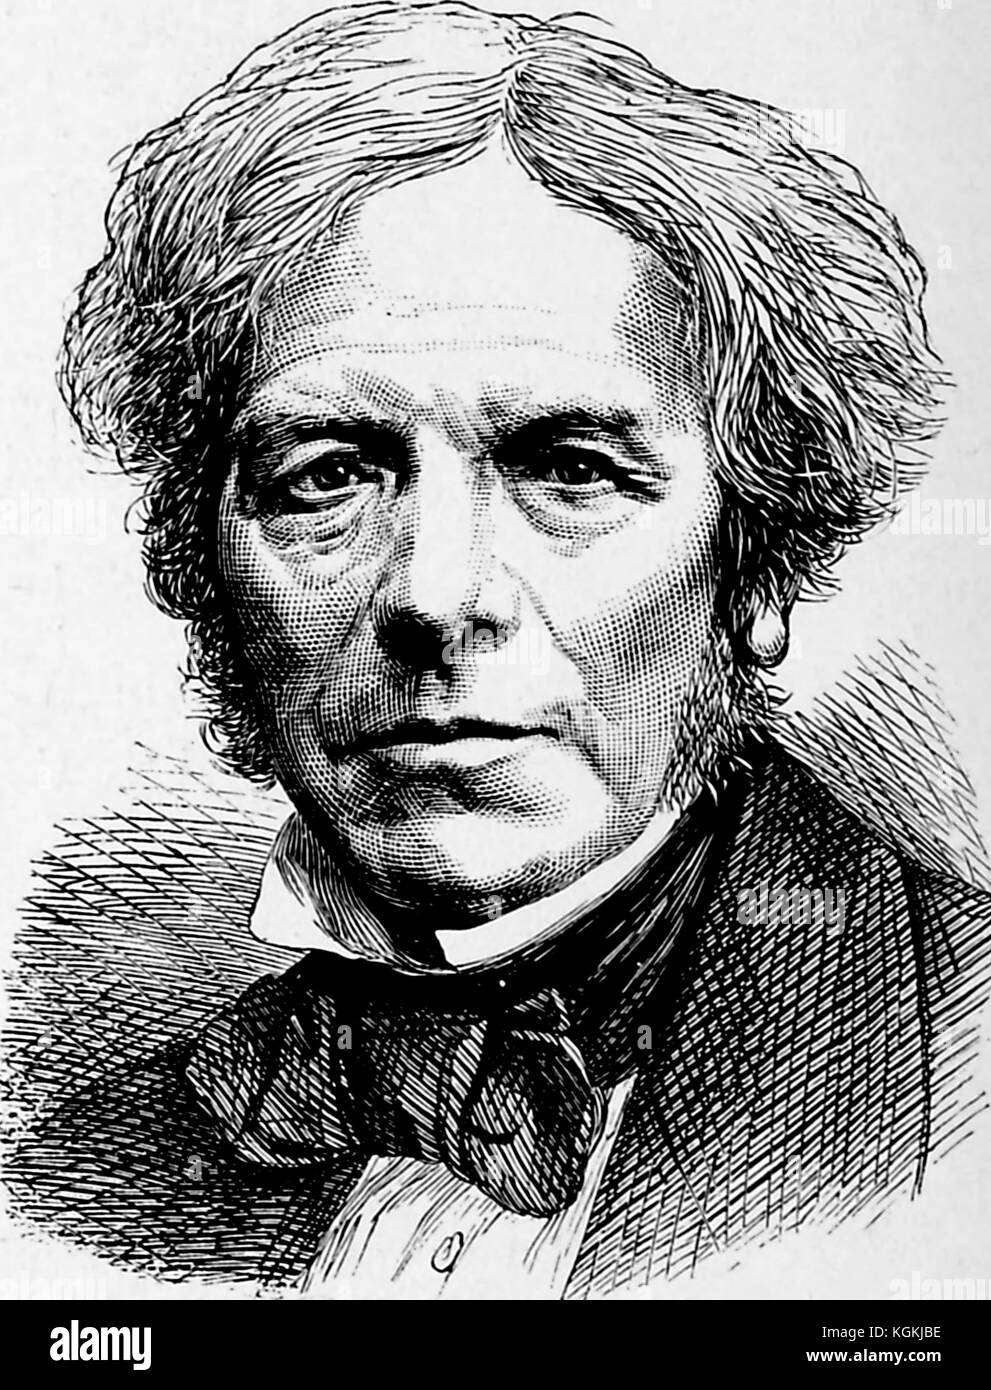 Engraved headshot portrait of the scientist Michael Faraday, 1916. Courtesy Internet Archive. Stock Photo